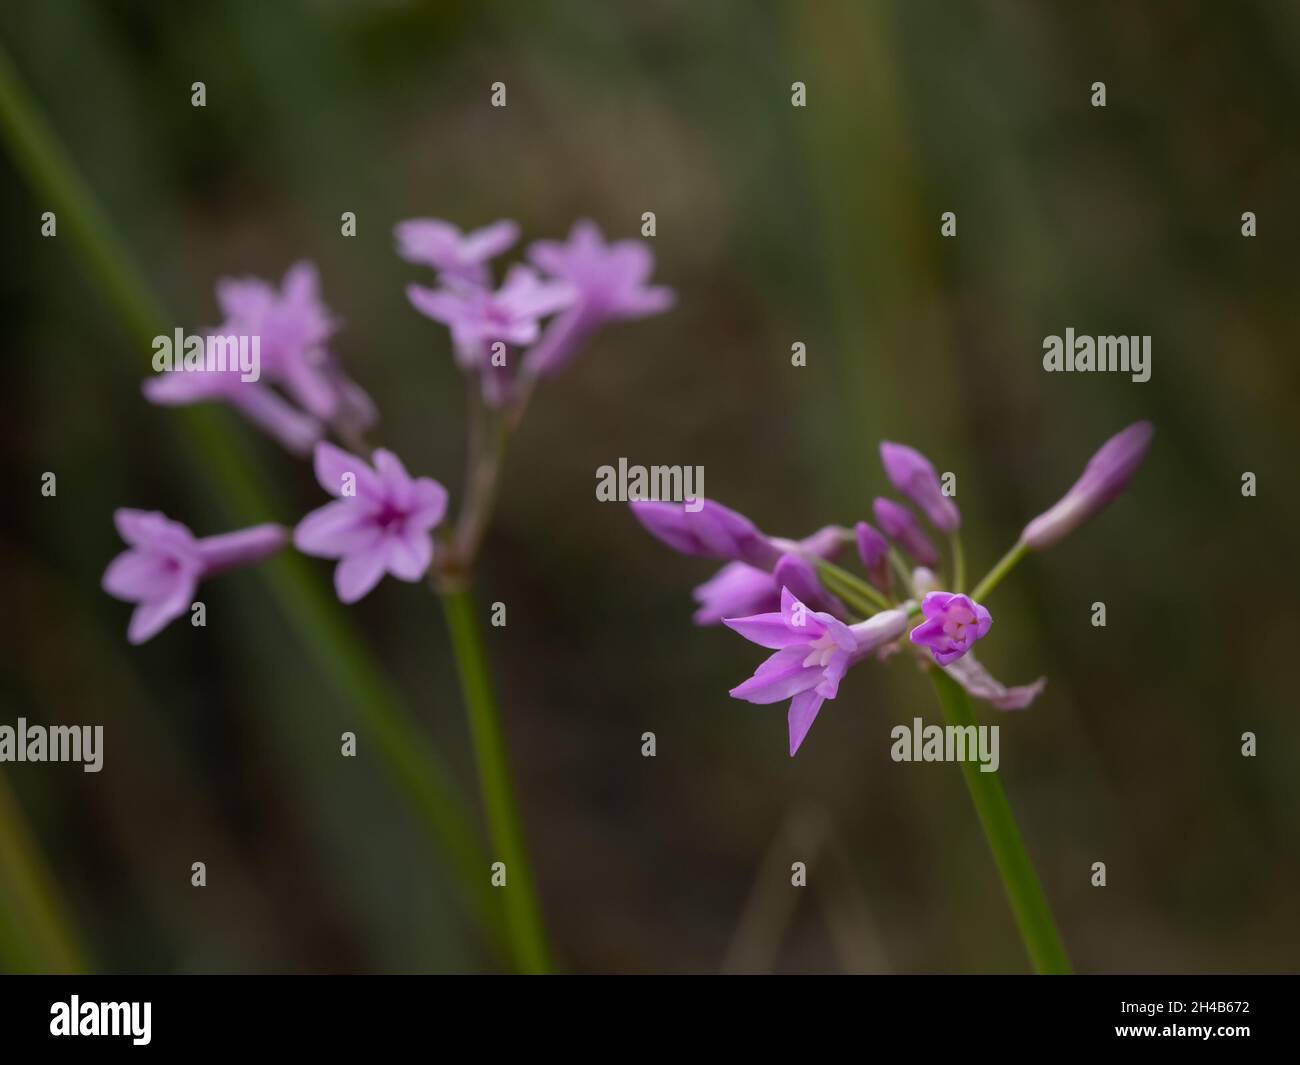 Closeup of flowers of Tulbaghia violacea in a garden in autumn Stock Photo